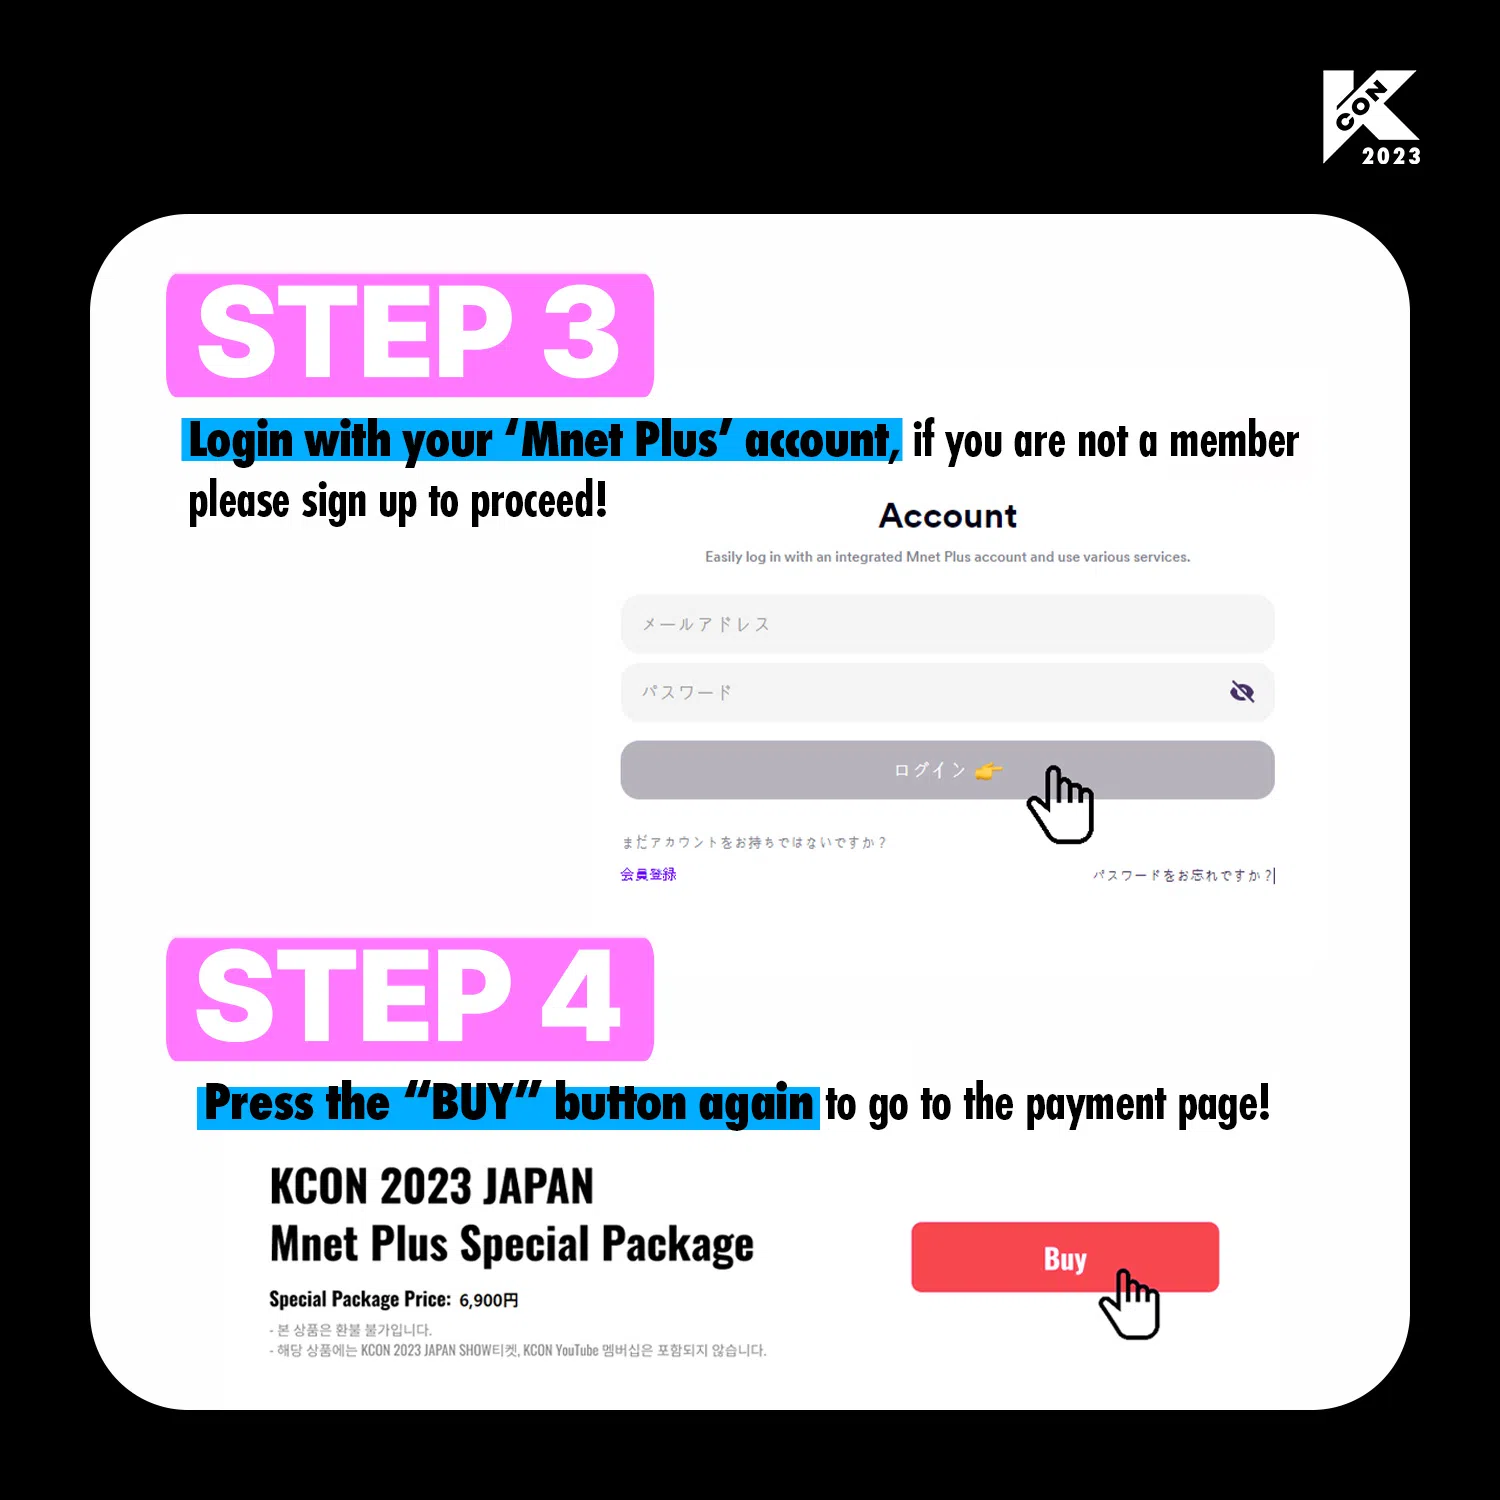 [KCON 2023 JAPAN] Plus Special Package Purchase Information